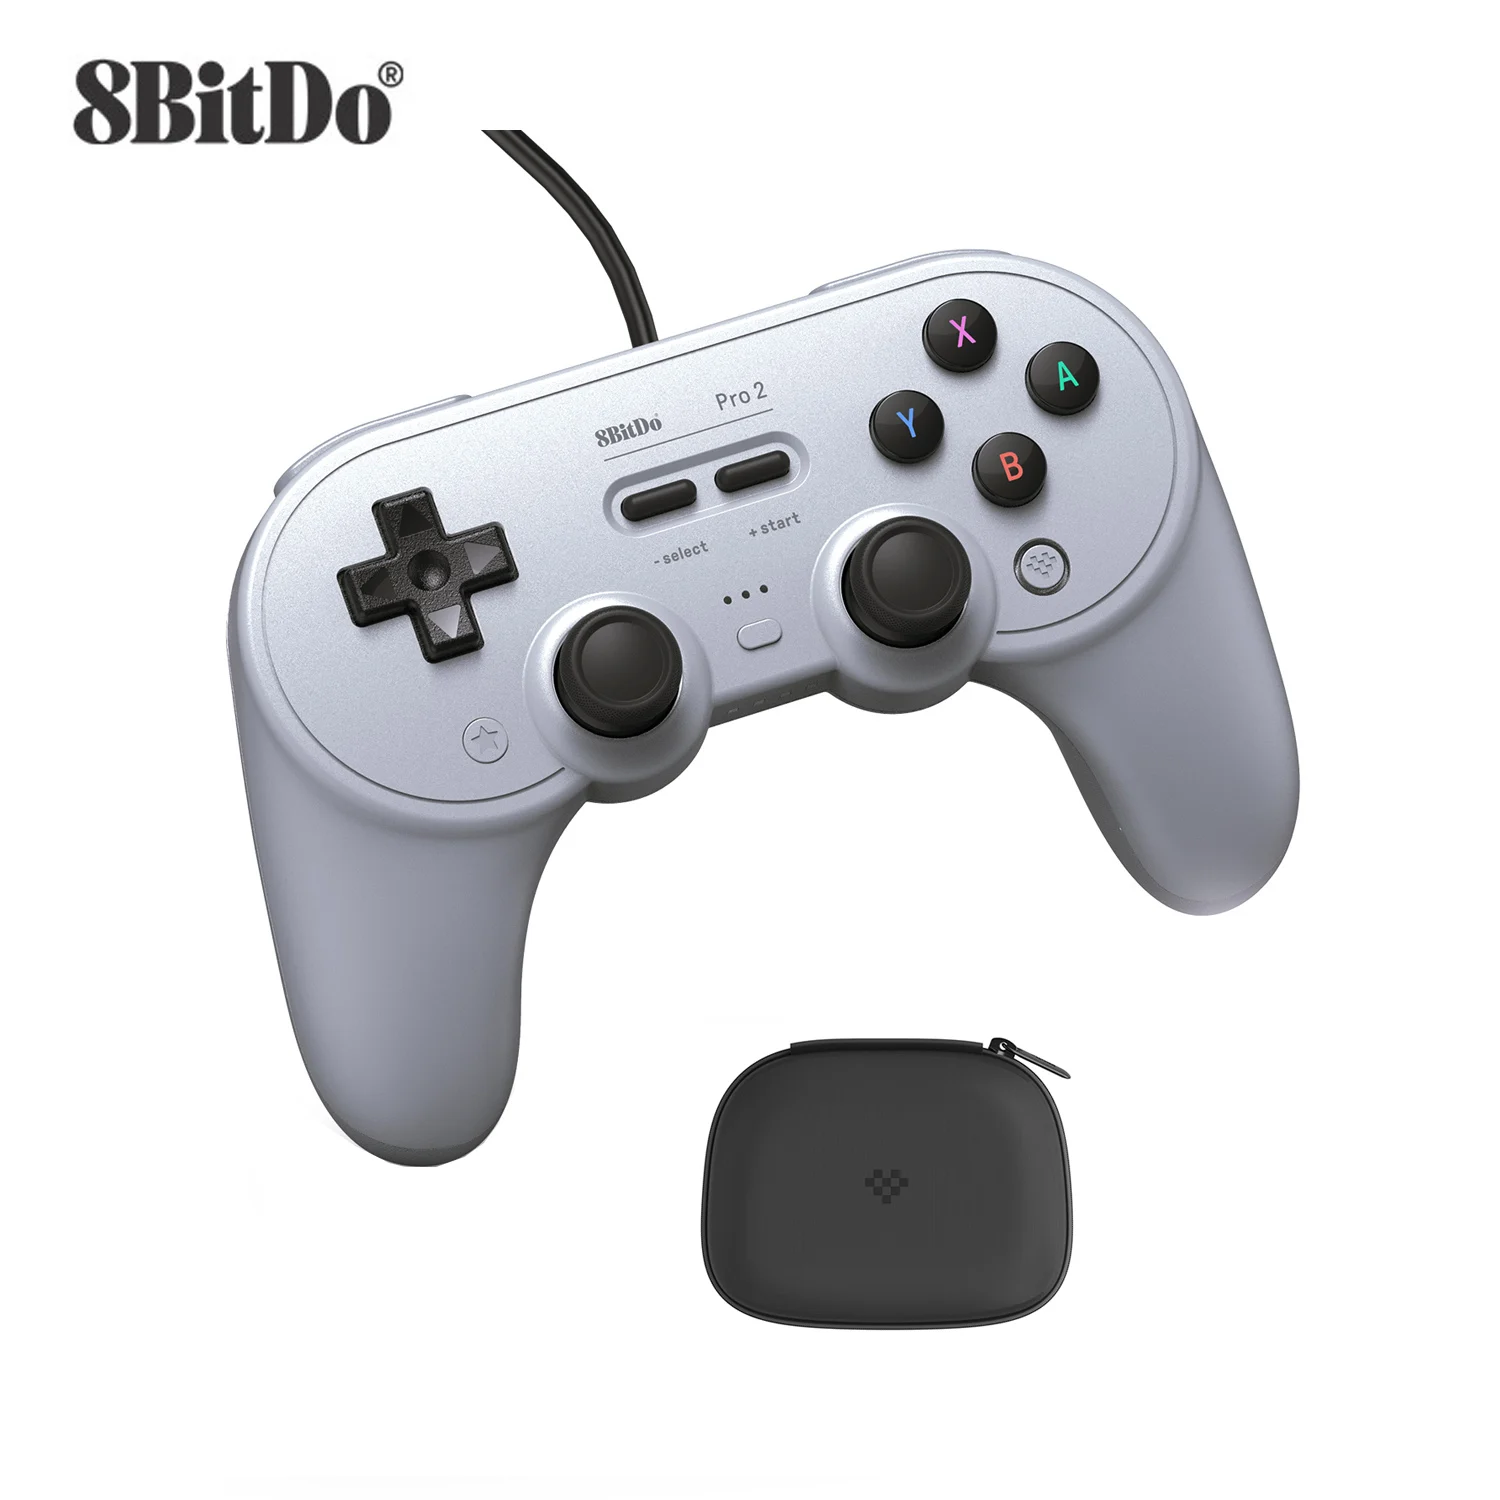 

8BitDo Pro 2 Wired Controller USB Gamepad with Joystick for Nintendo Switch OLED PC with 2 Pro Back Paddle Buttons Accessories